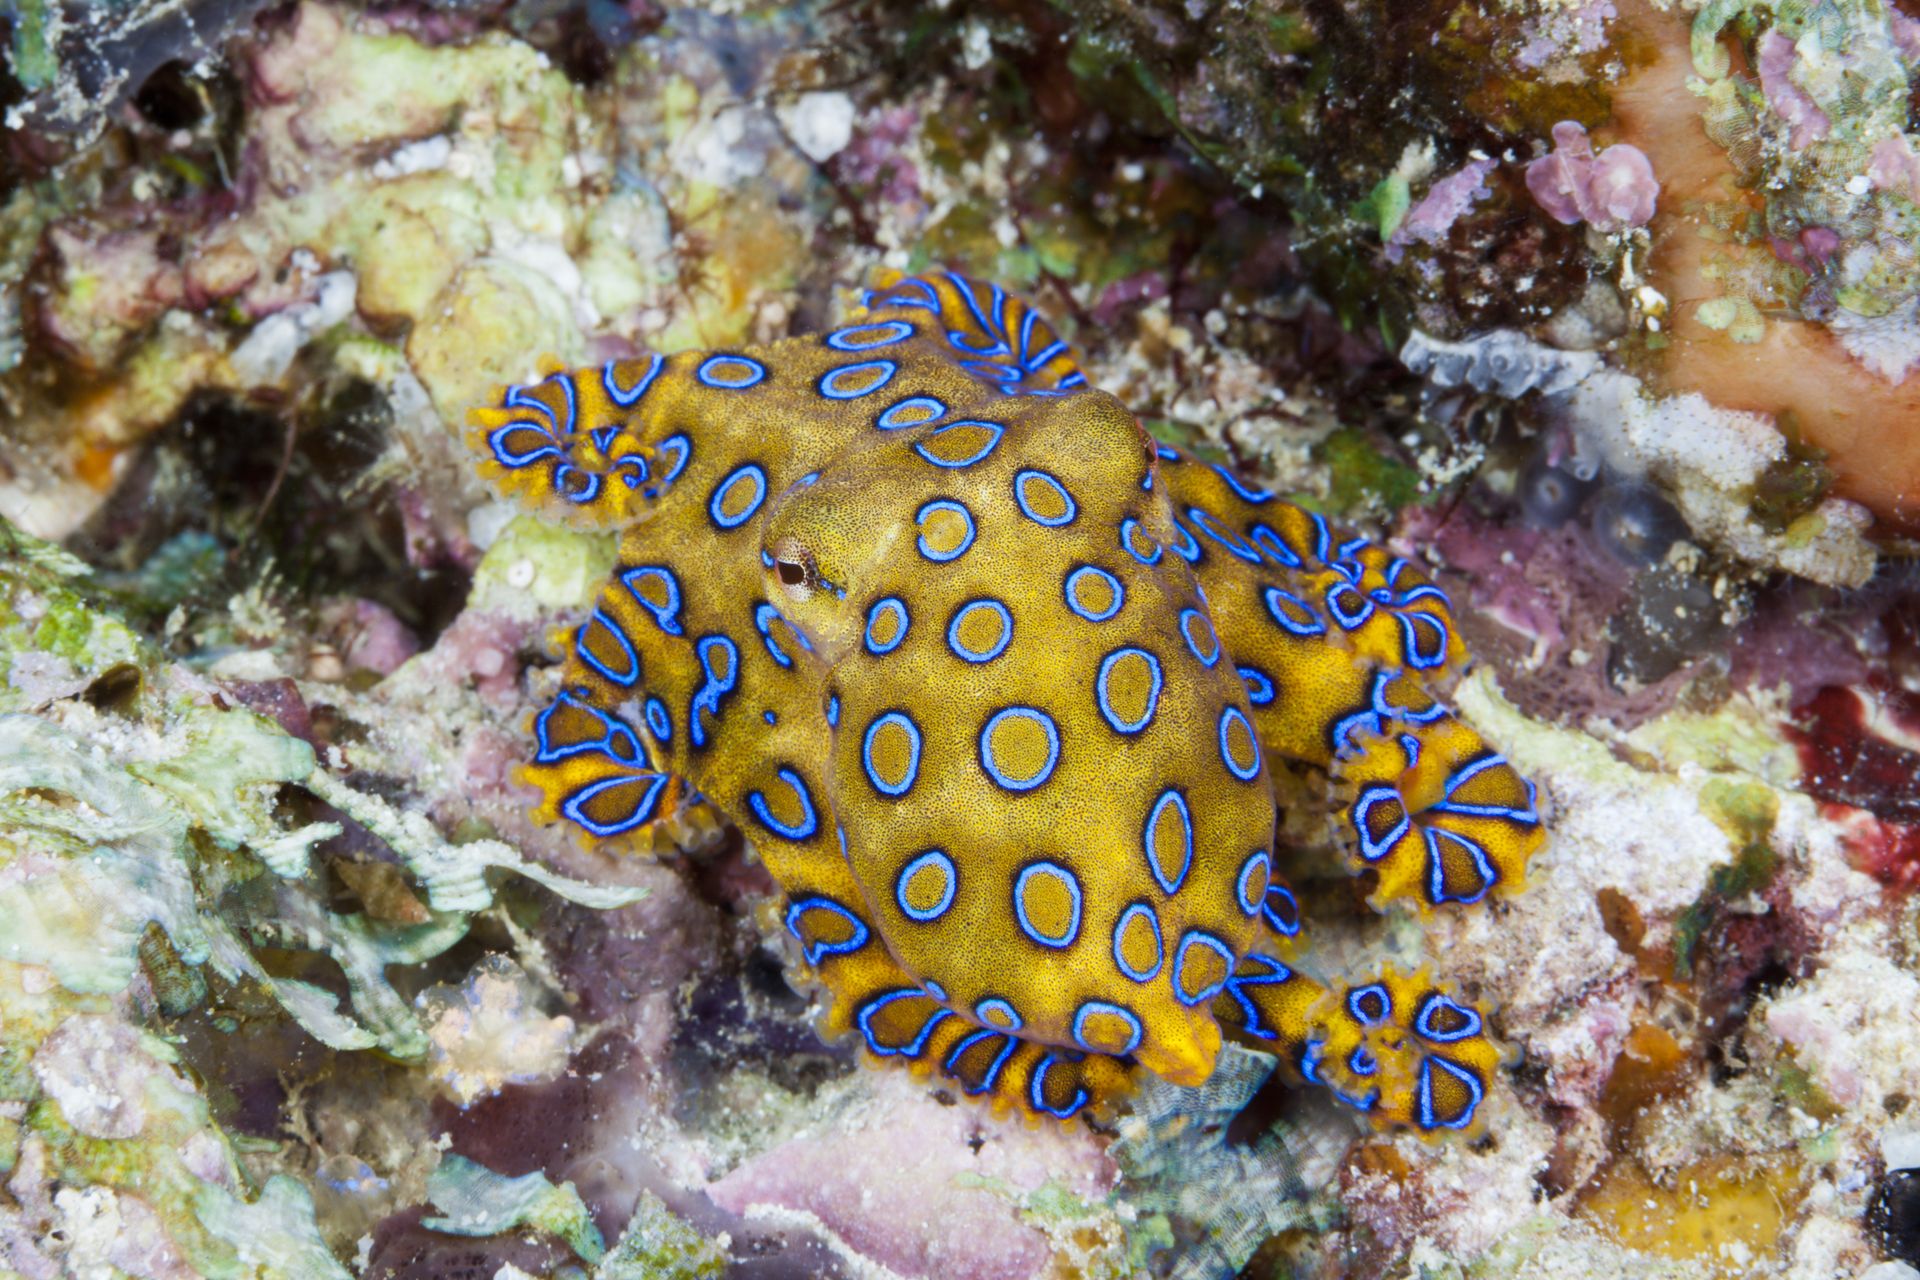 The blue-ringed octopus